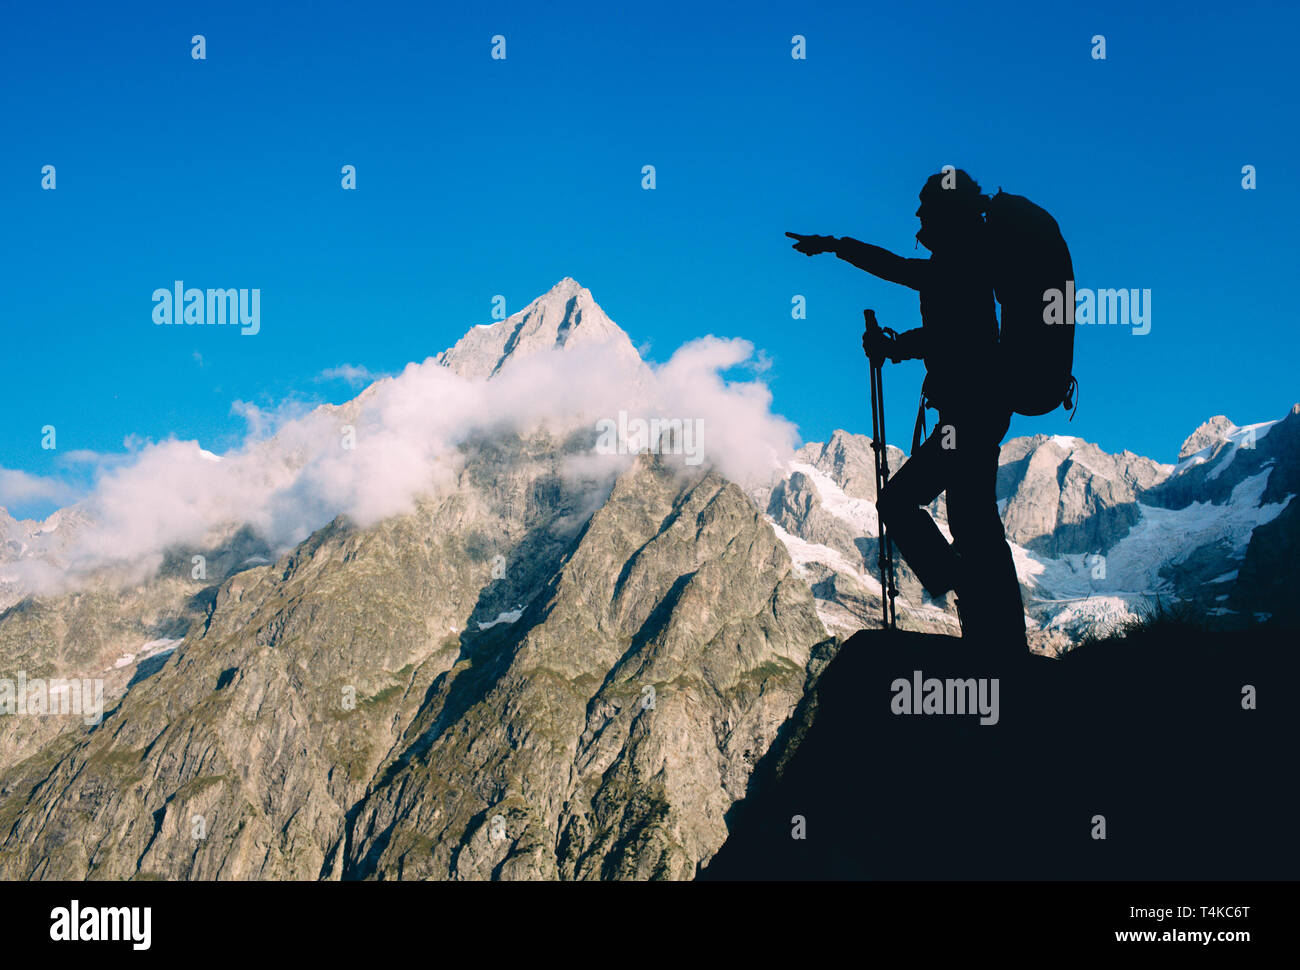 Silhouette woman with backpack and trekking pole, hiking over European Alps on the background. Stock Photo